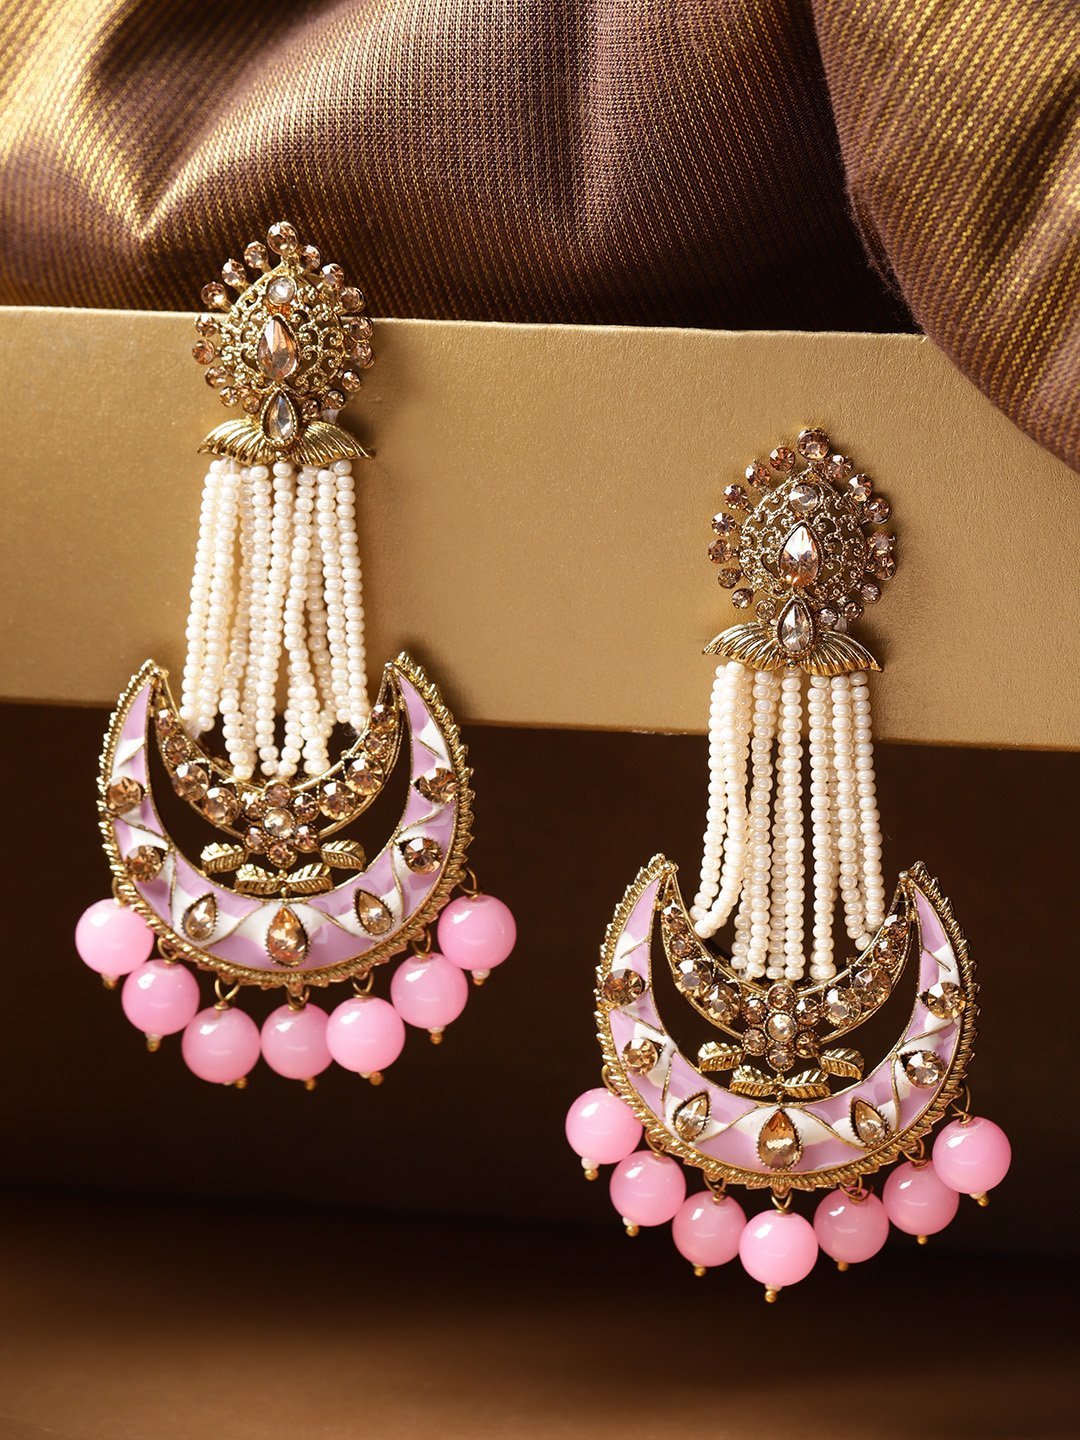 Women's Gold-Plated Stones Studded Chandbalis Earrings with Meenakari In Pink And White Color - Priyaasi